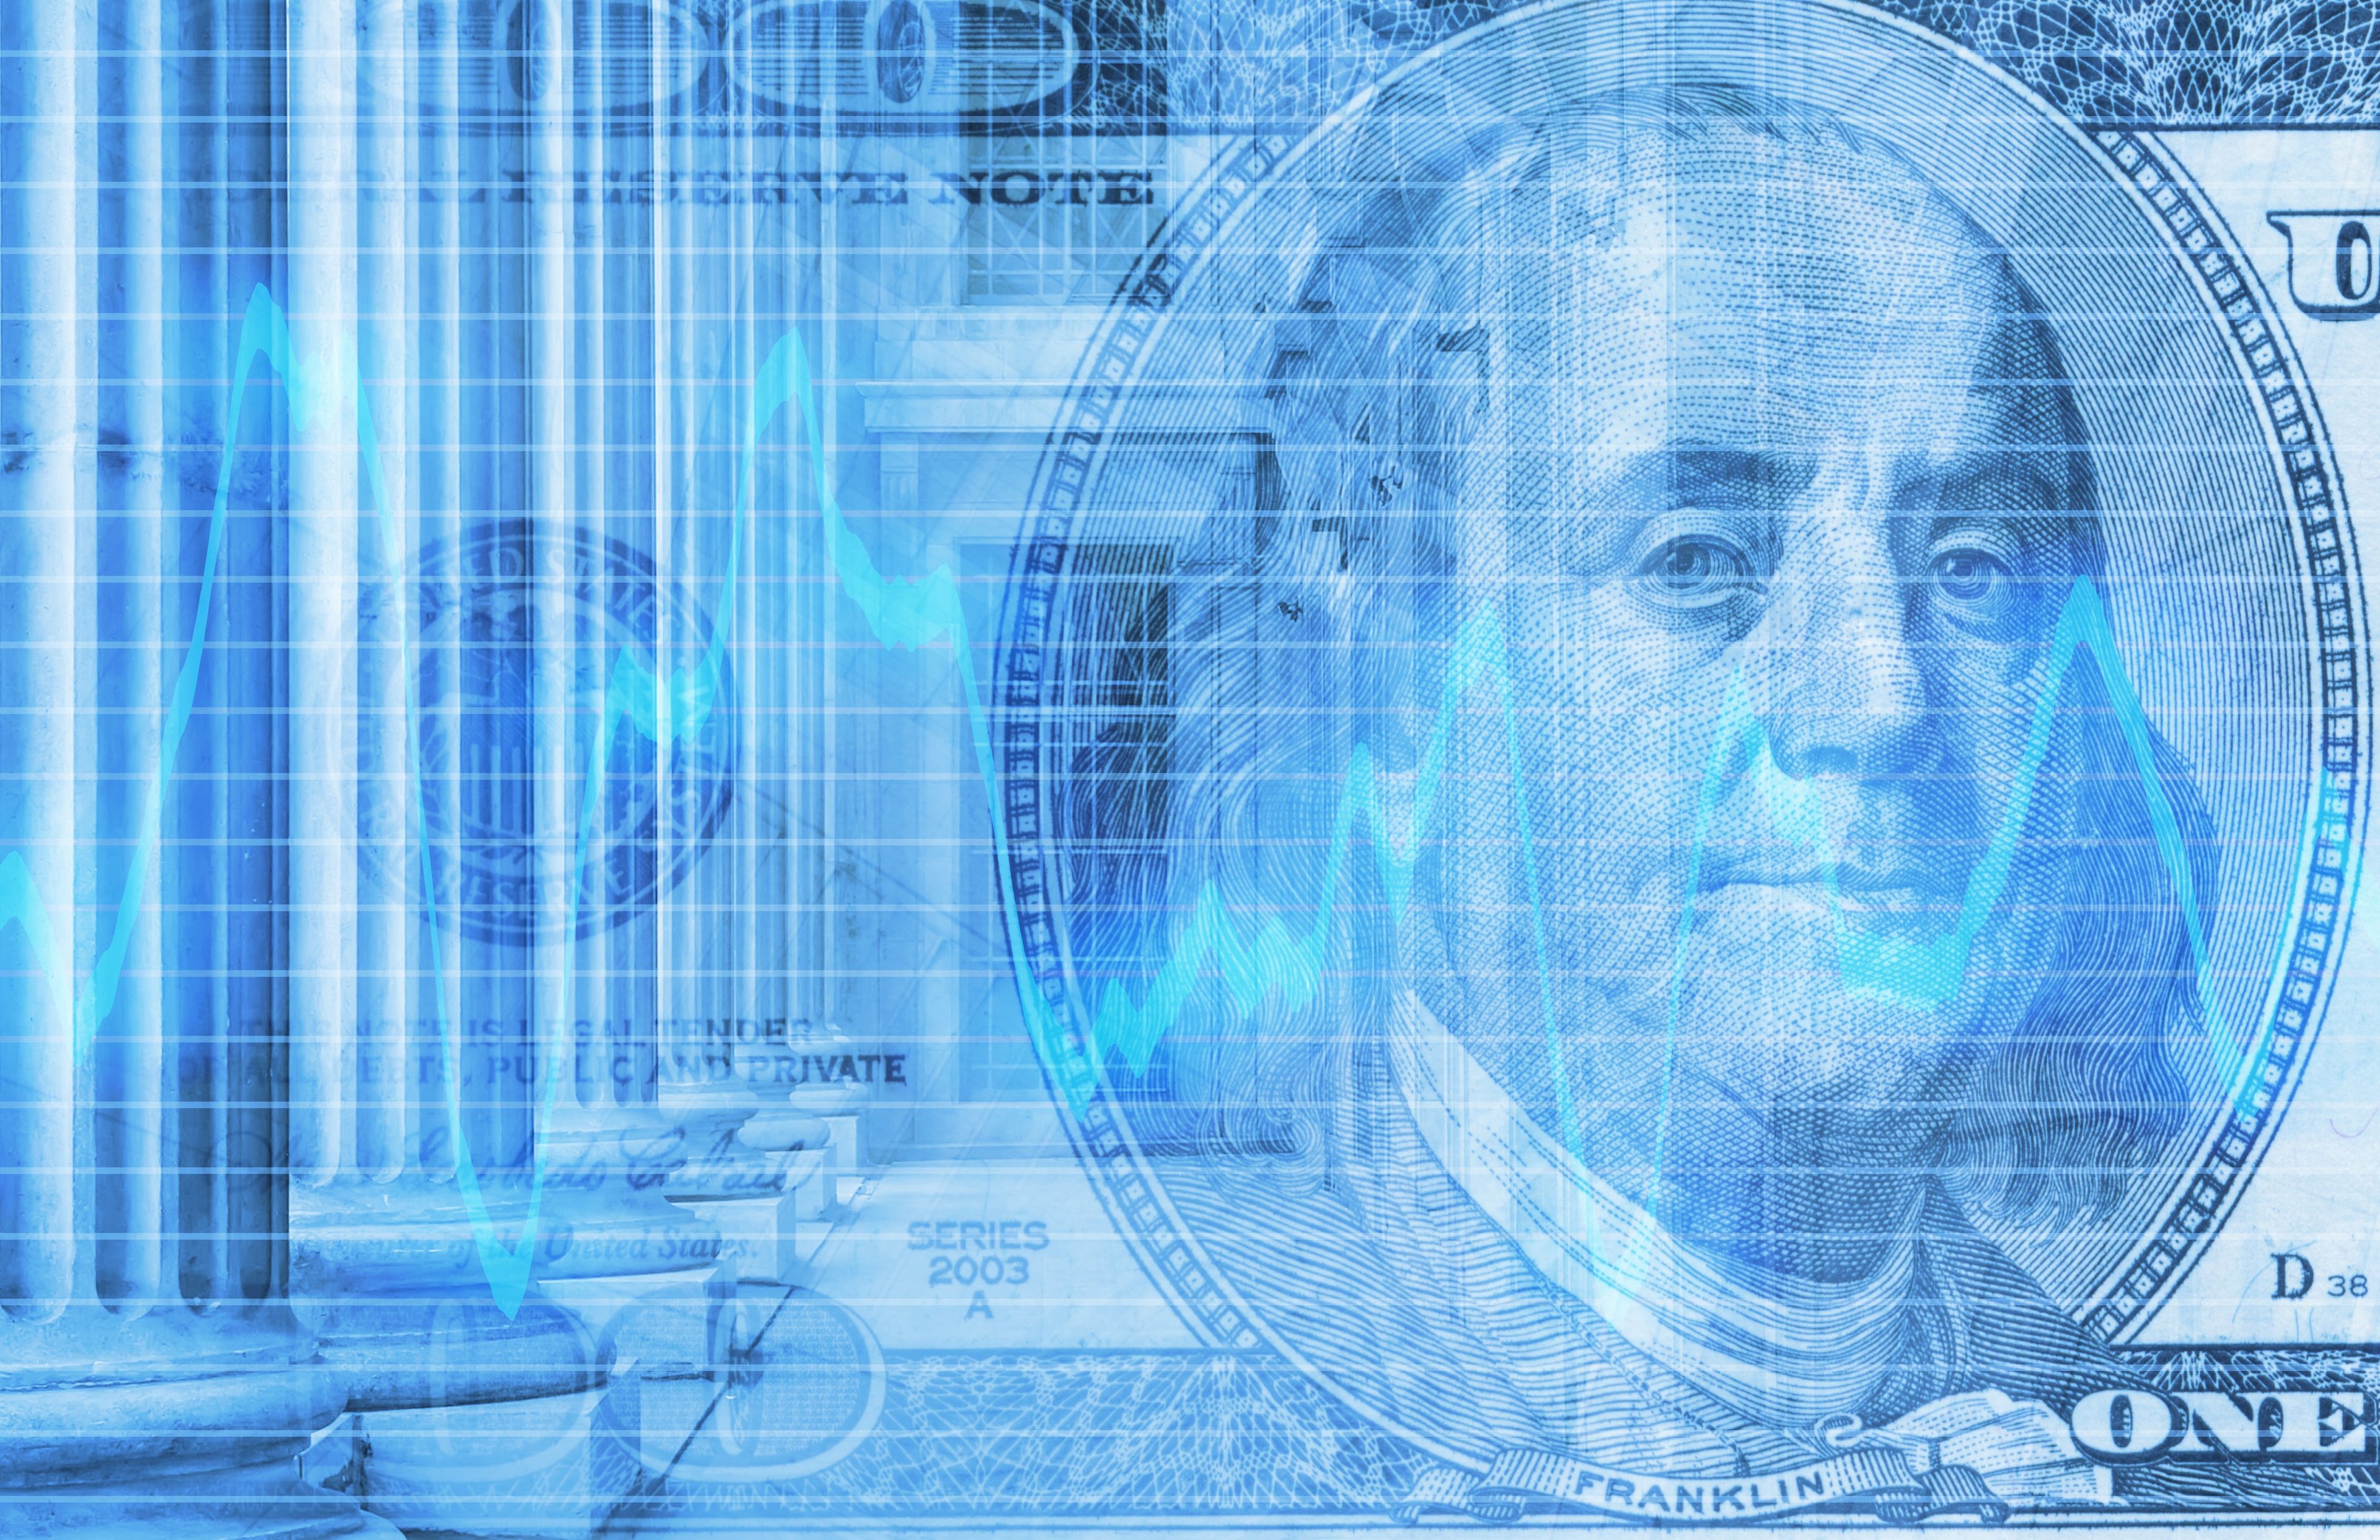 An abstract image of a US dollar bill with Wall Street in the background